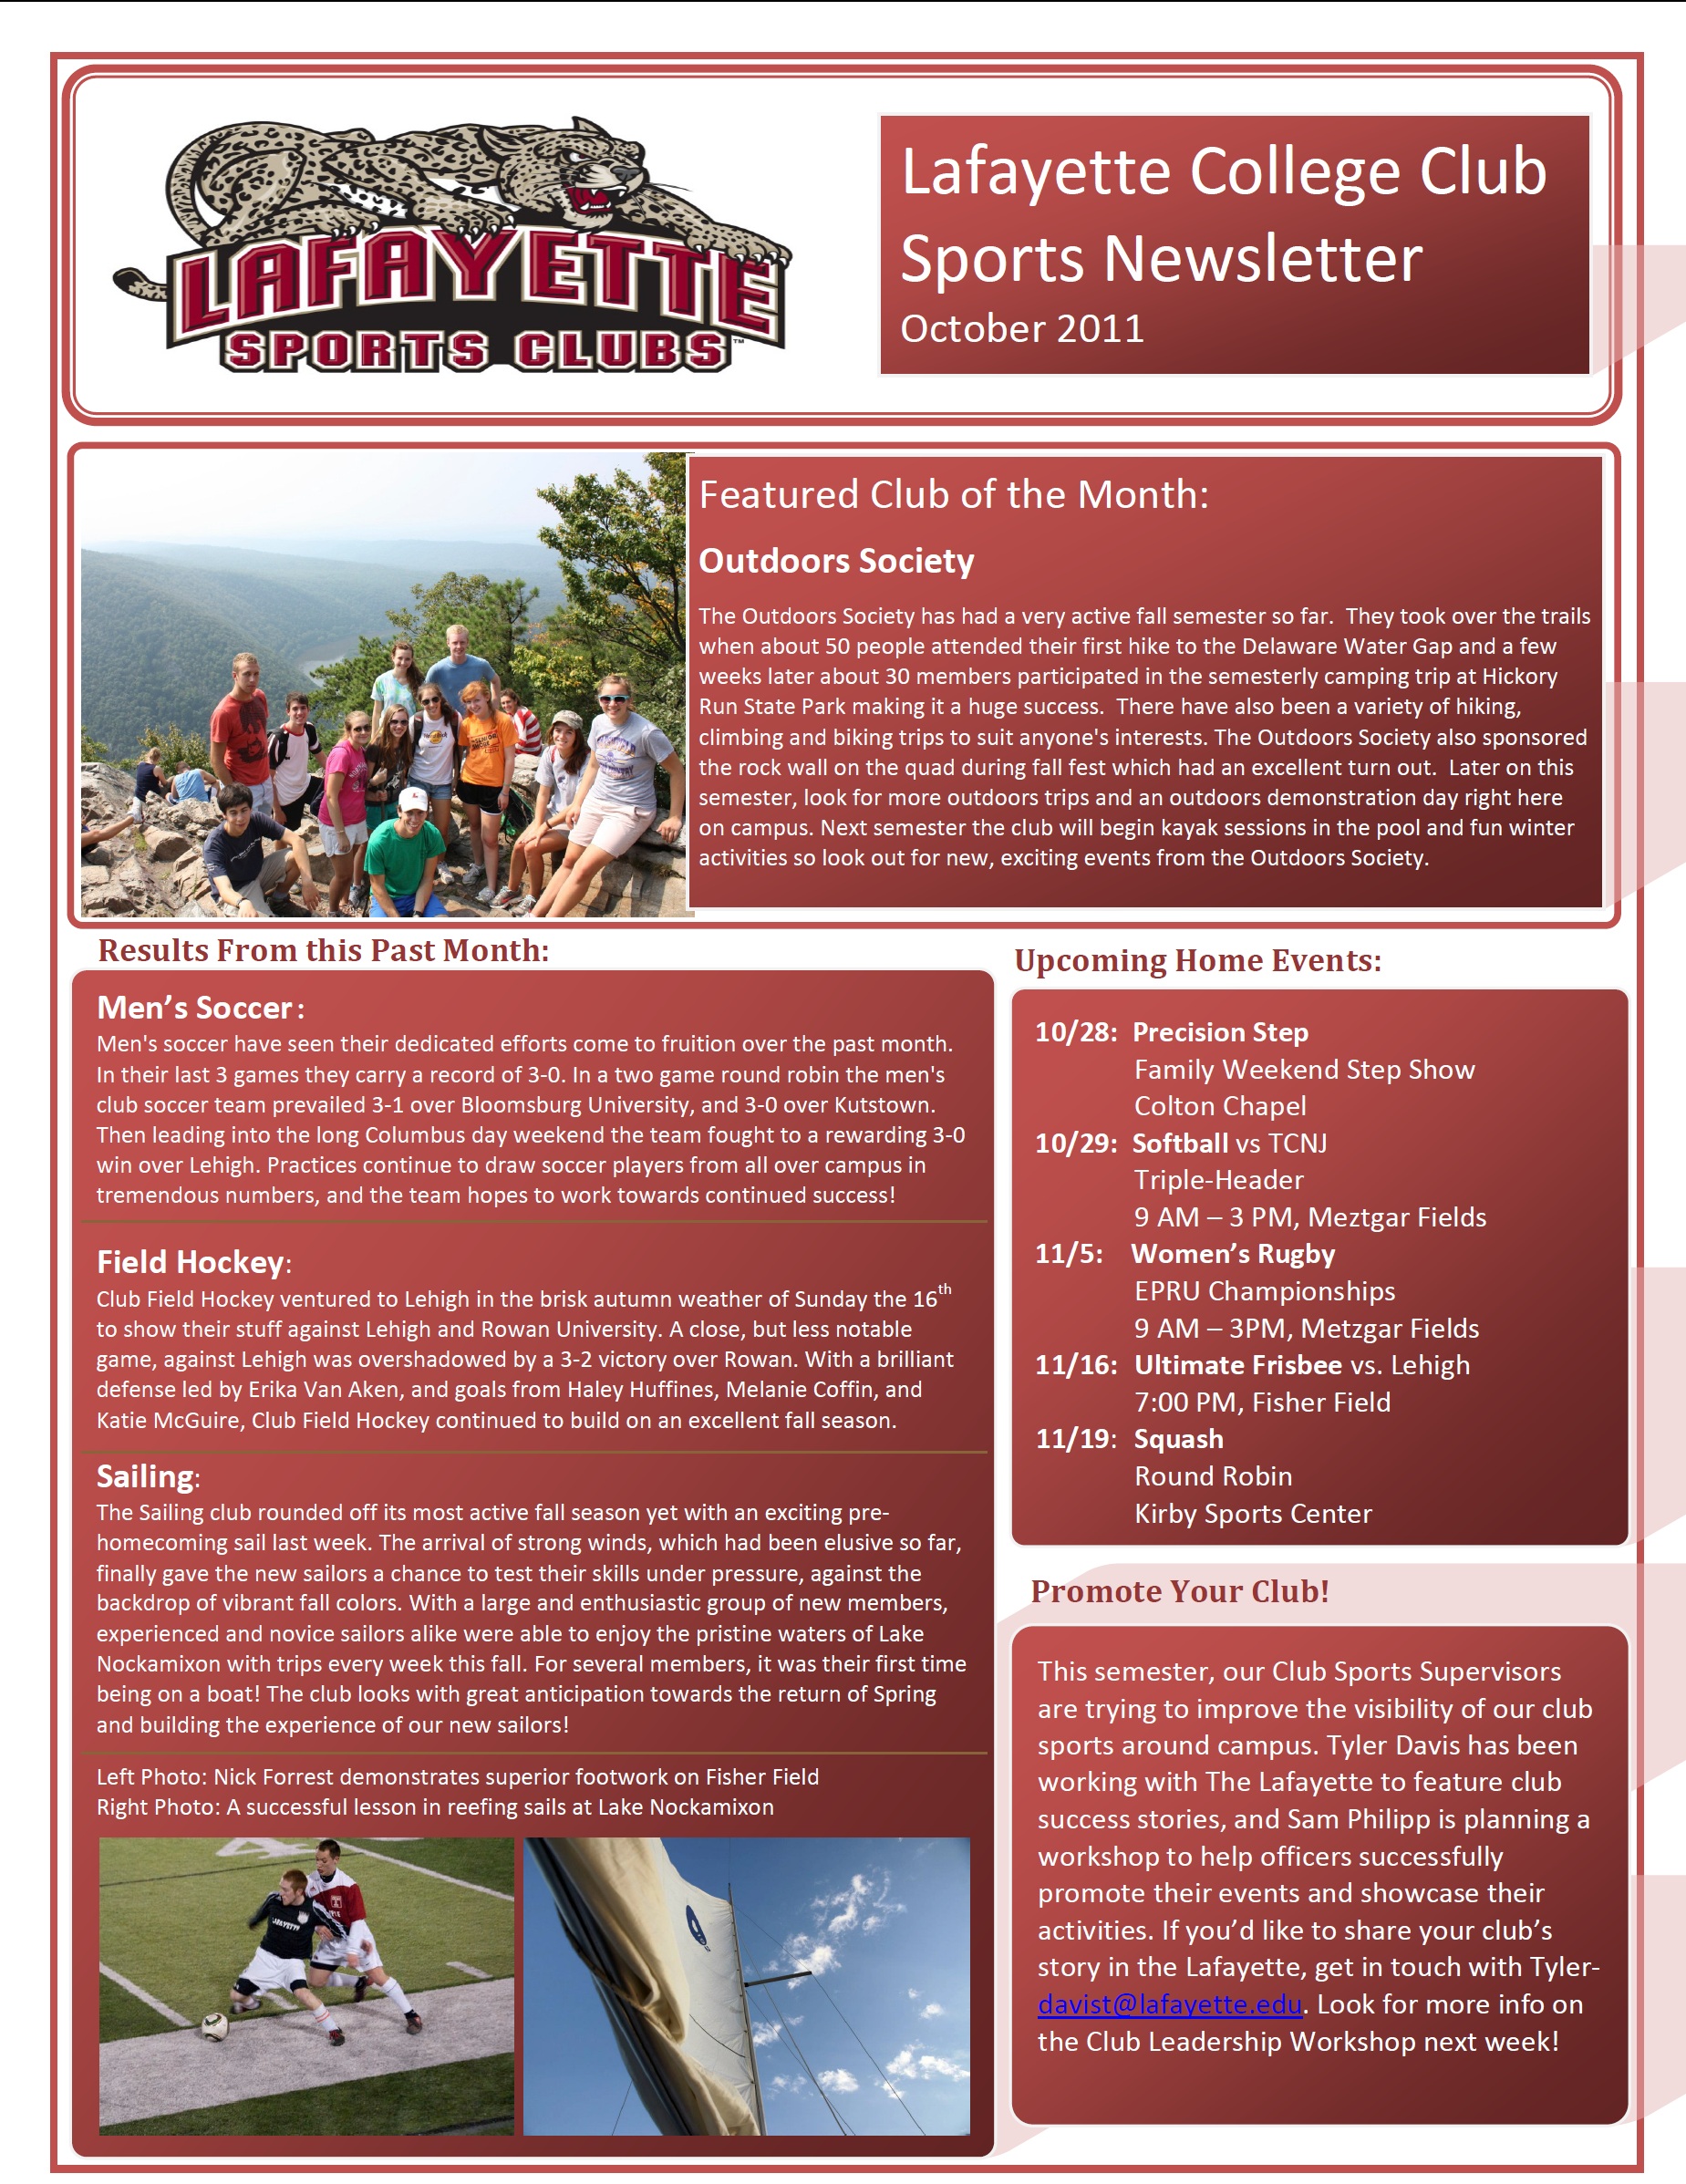 October Club Sports Newsletter